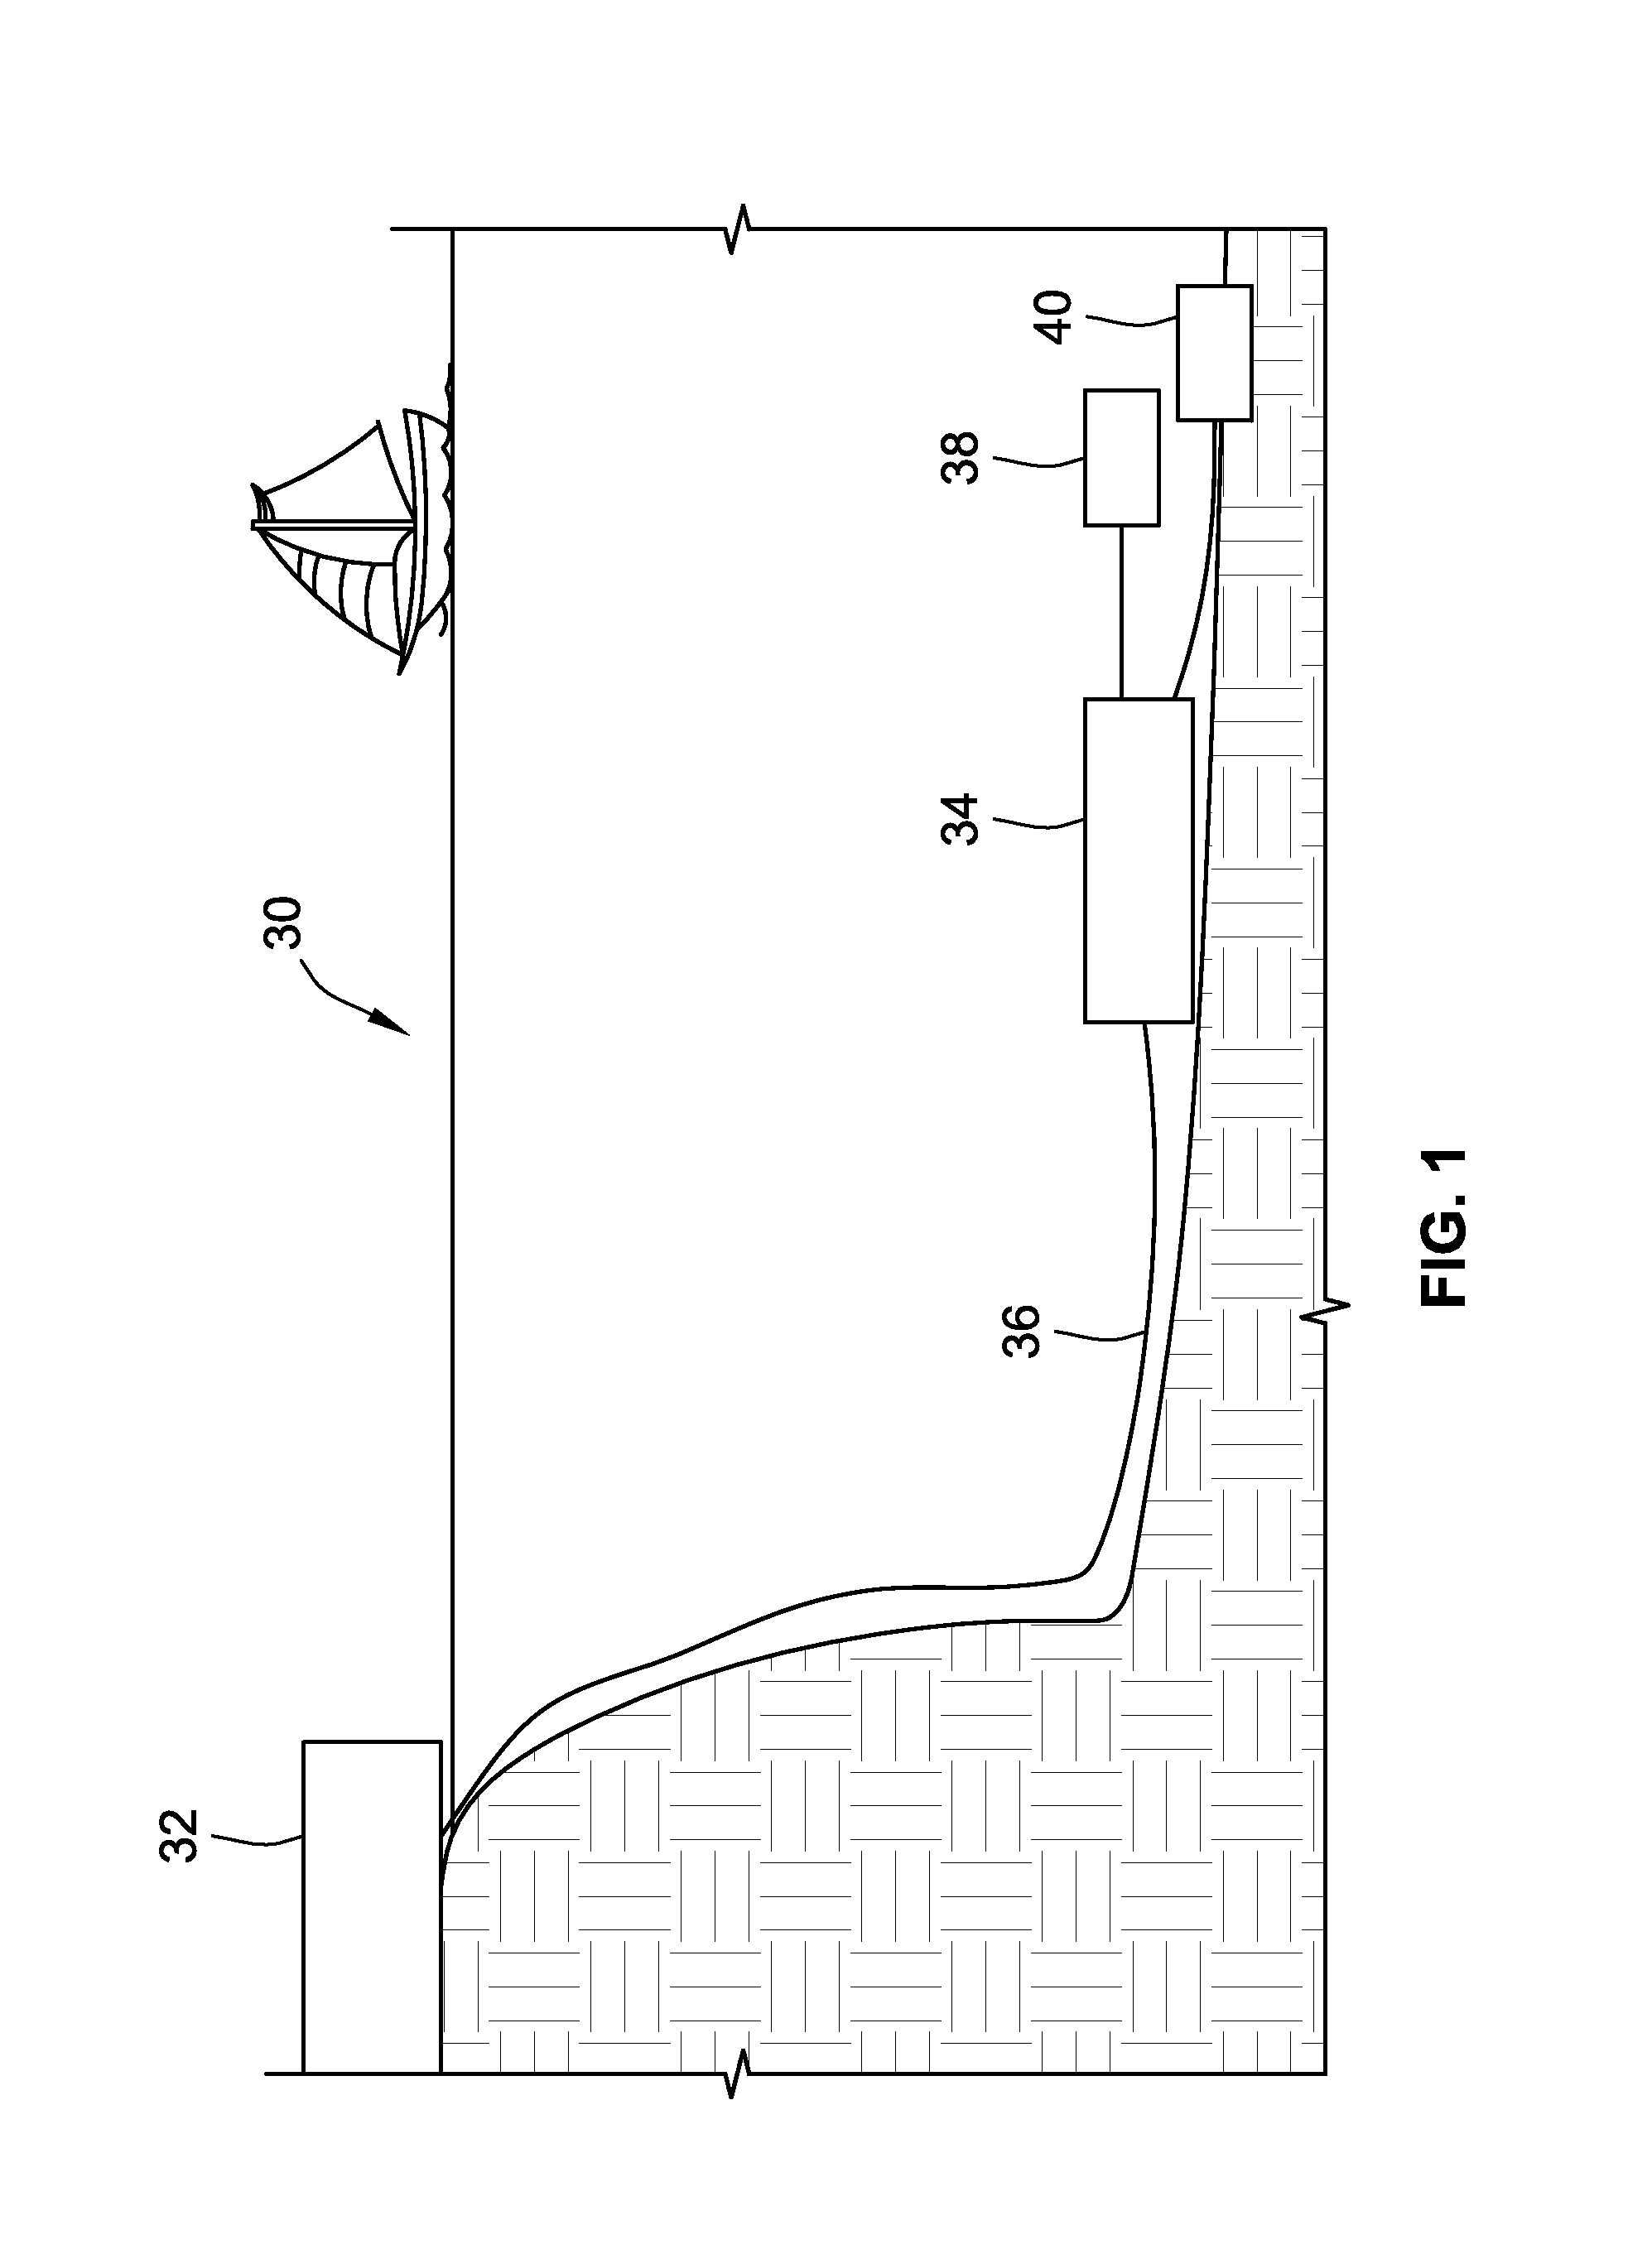 Subsea Electrical Distribution System Operable to Supply Power to Subsea Load from Plurality of Sources